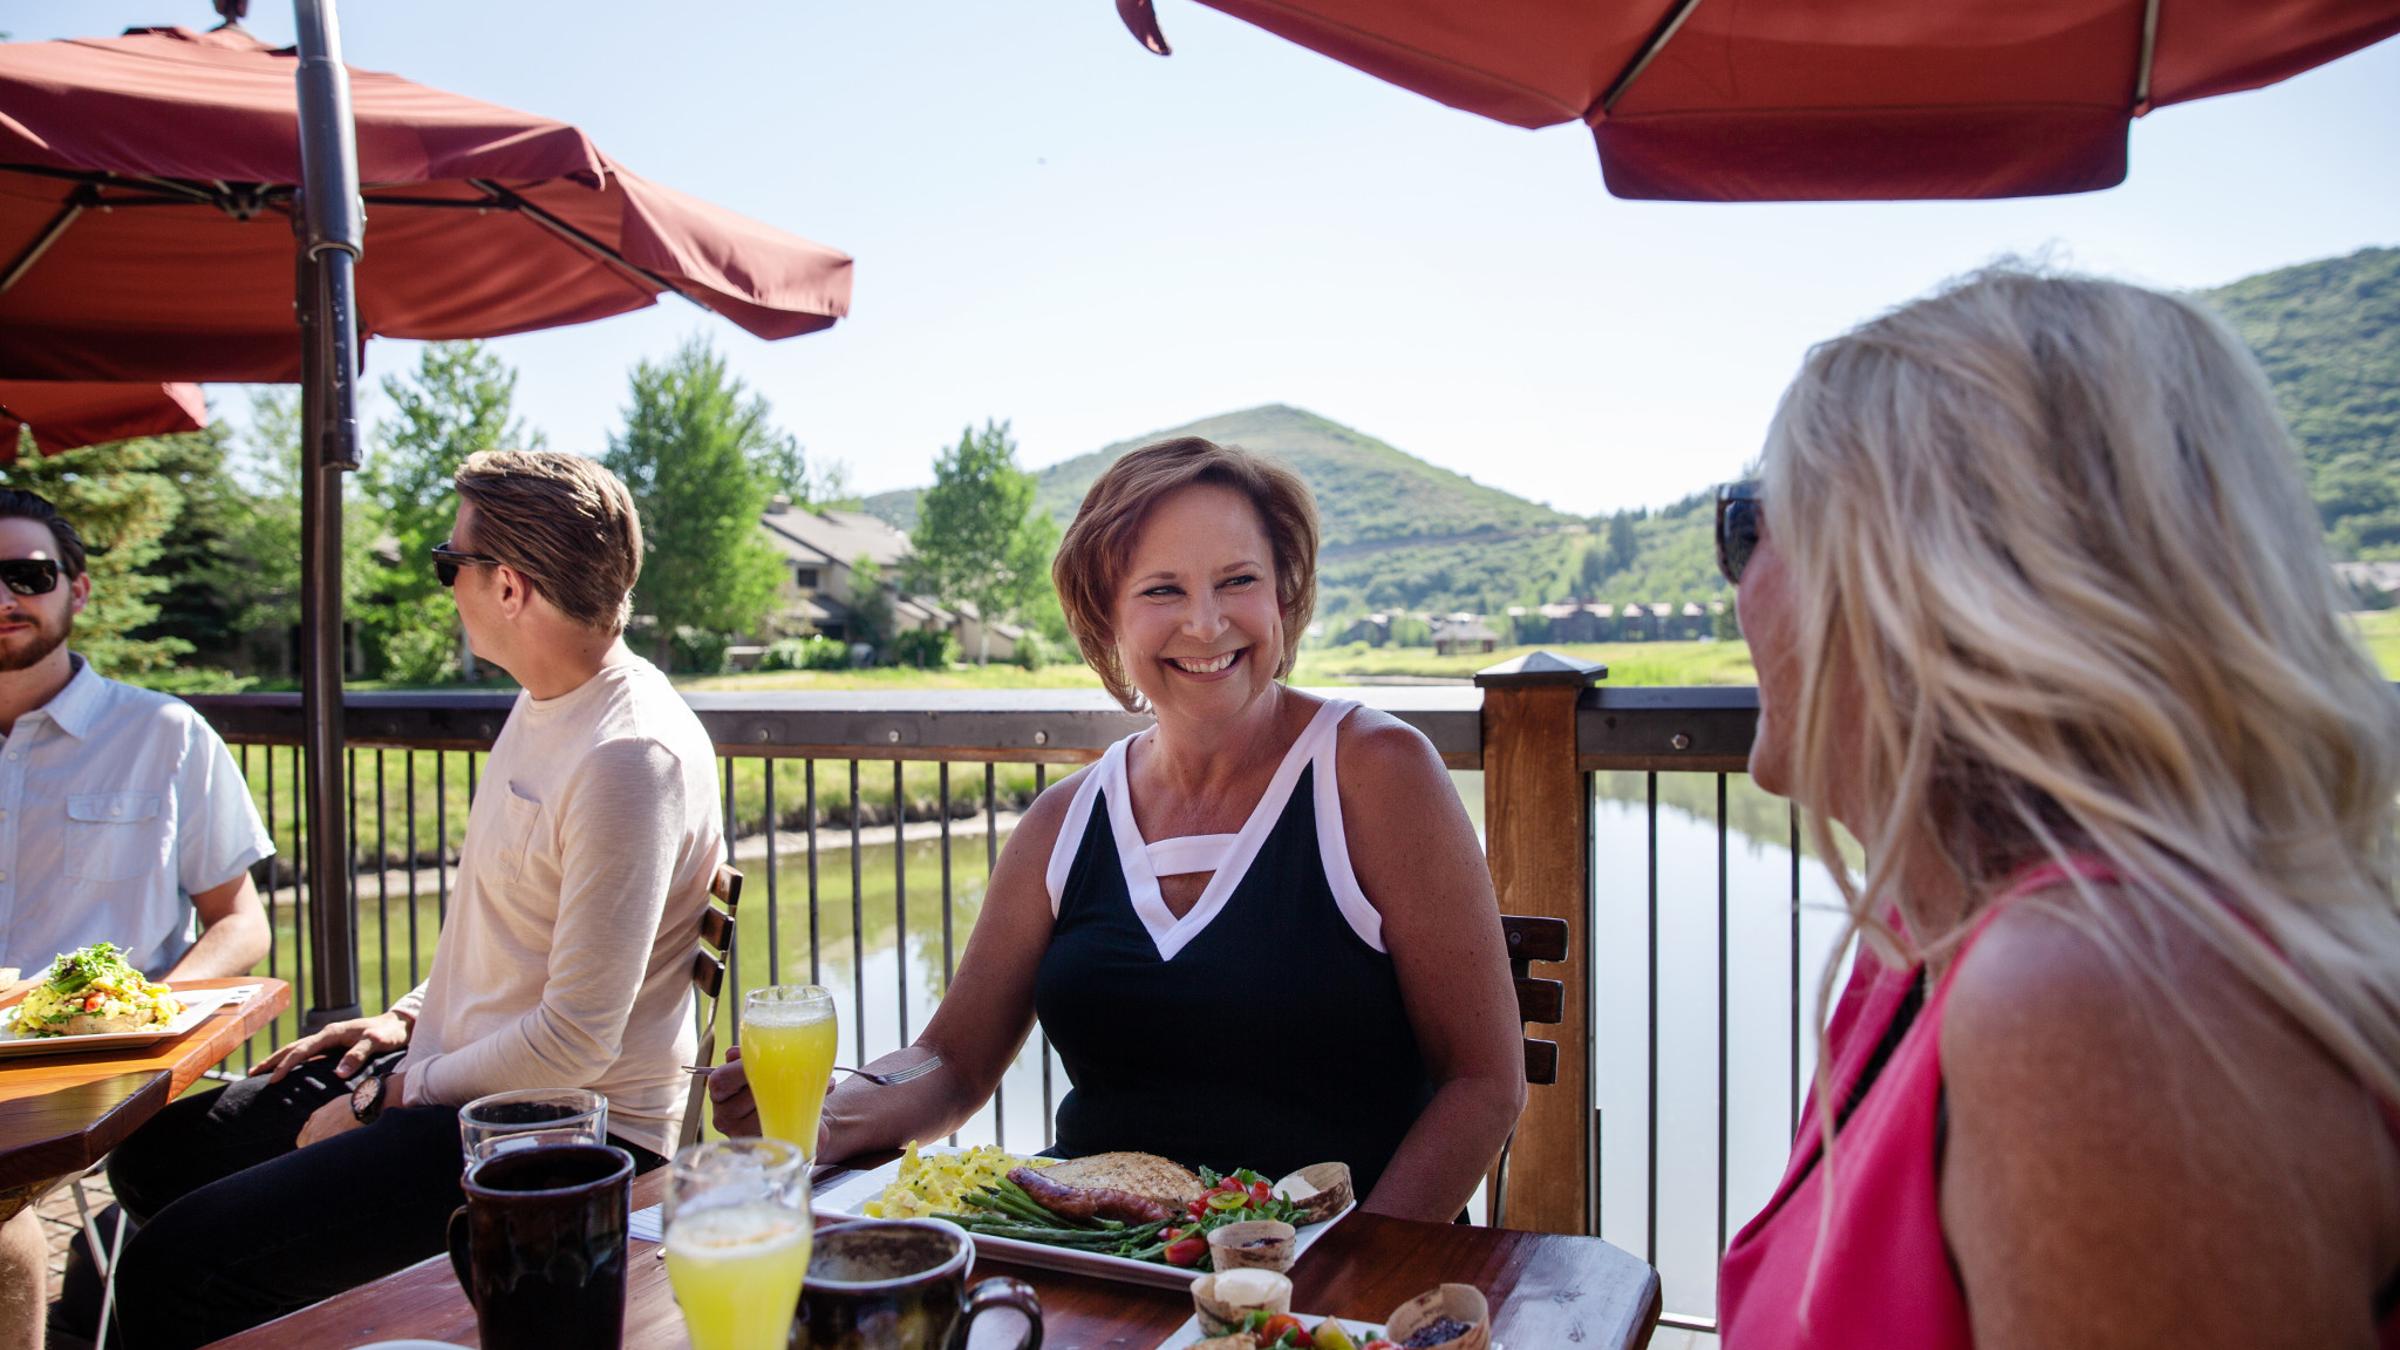 Guests dining on the deck at Deer Valley Grocery Cafe at Deer Valley in Park City, UT